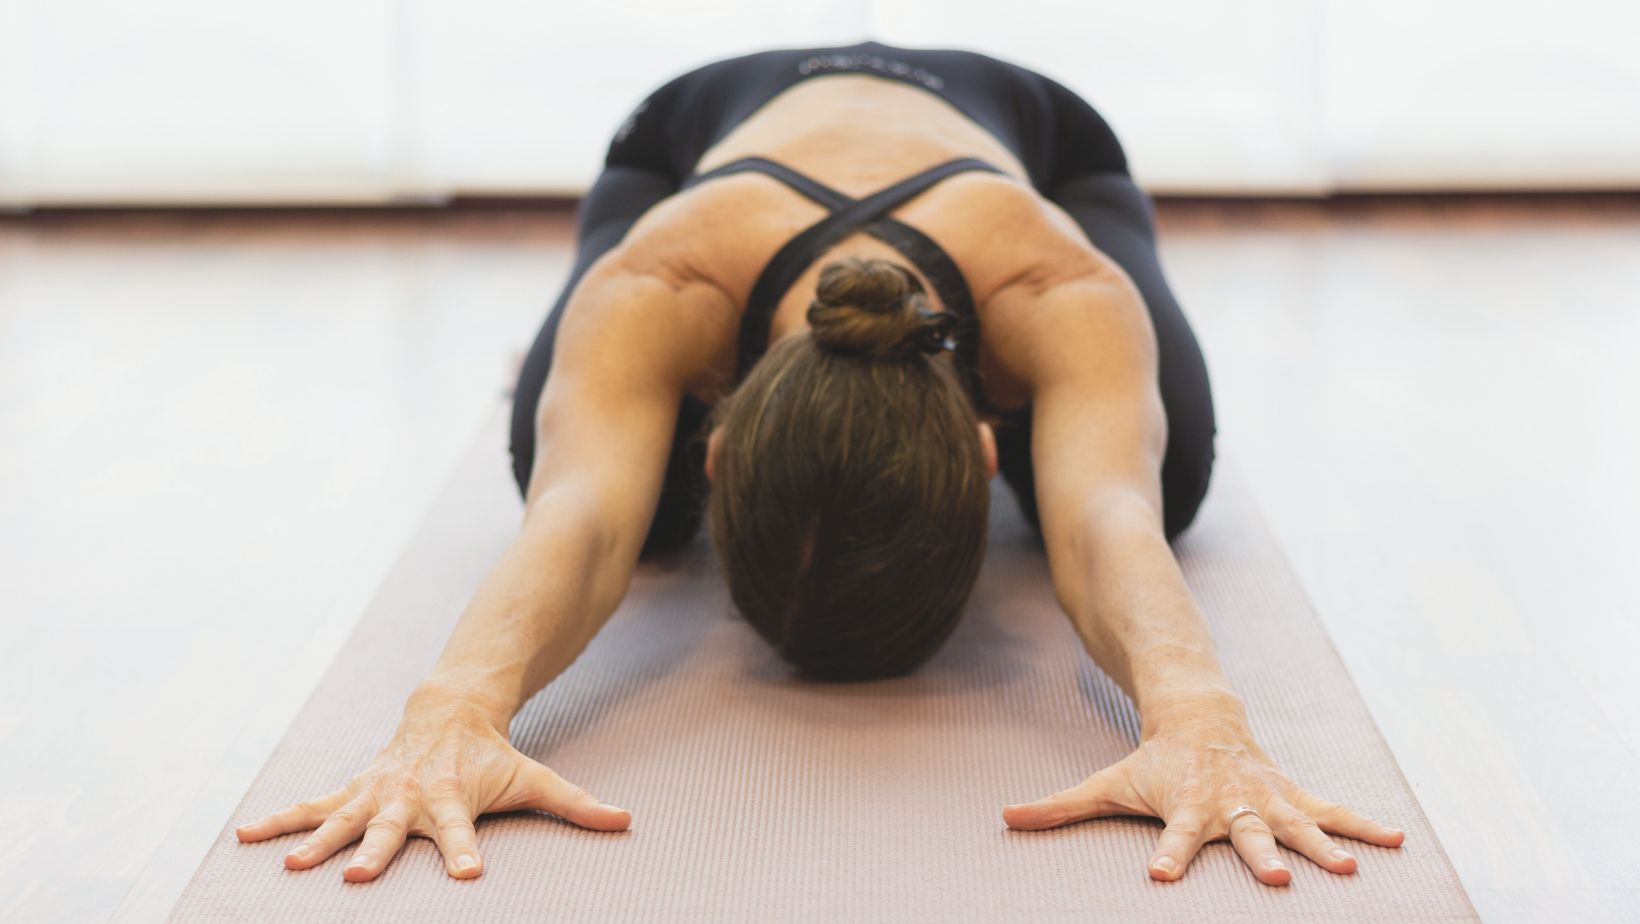 Yoga and Physical Therapy: How to Practice with Injuries | Yoga Anytime